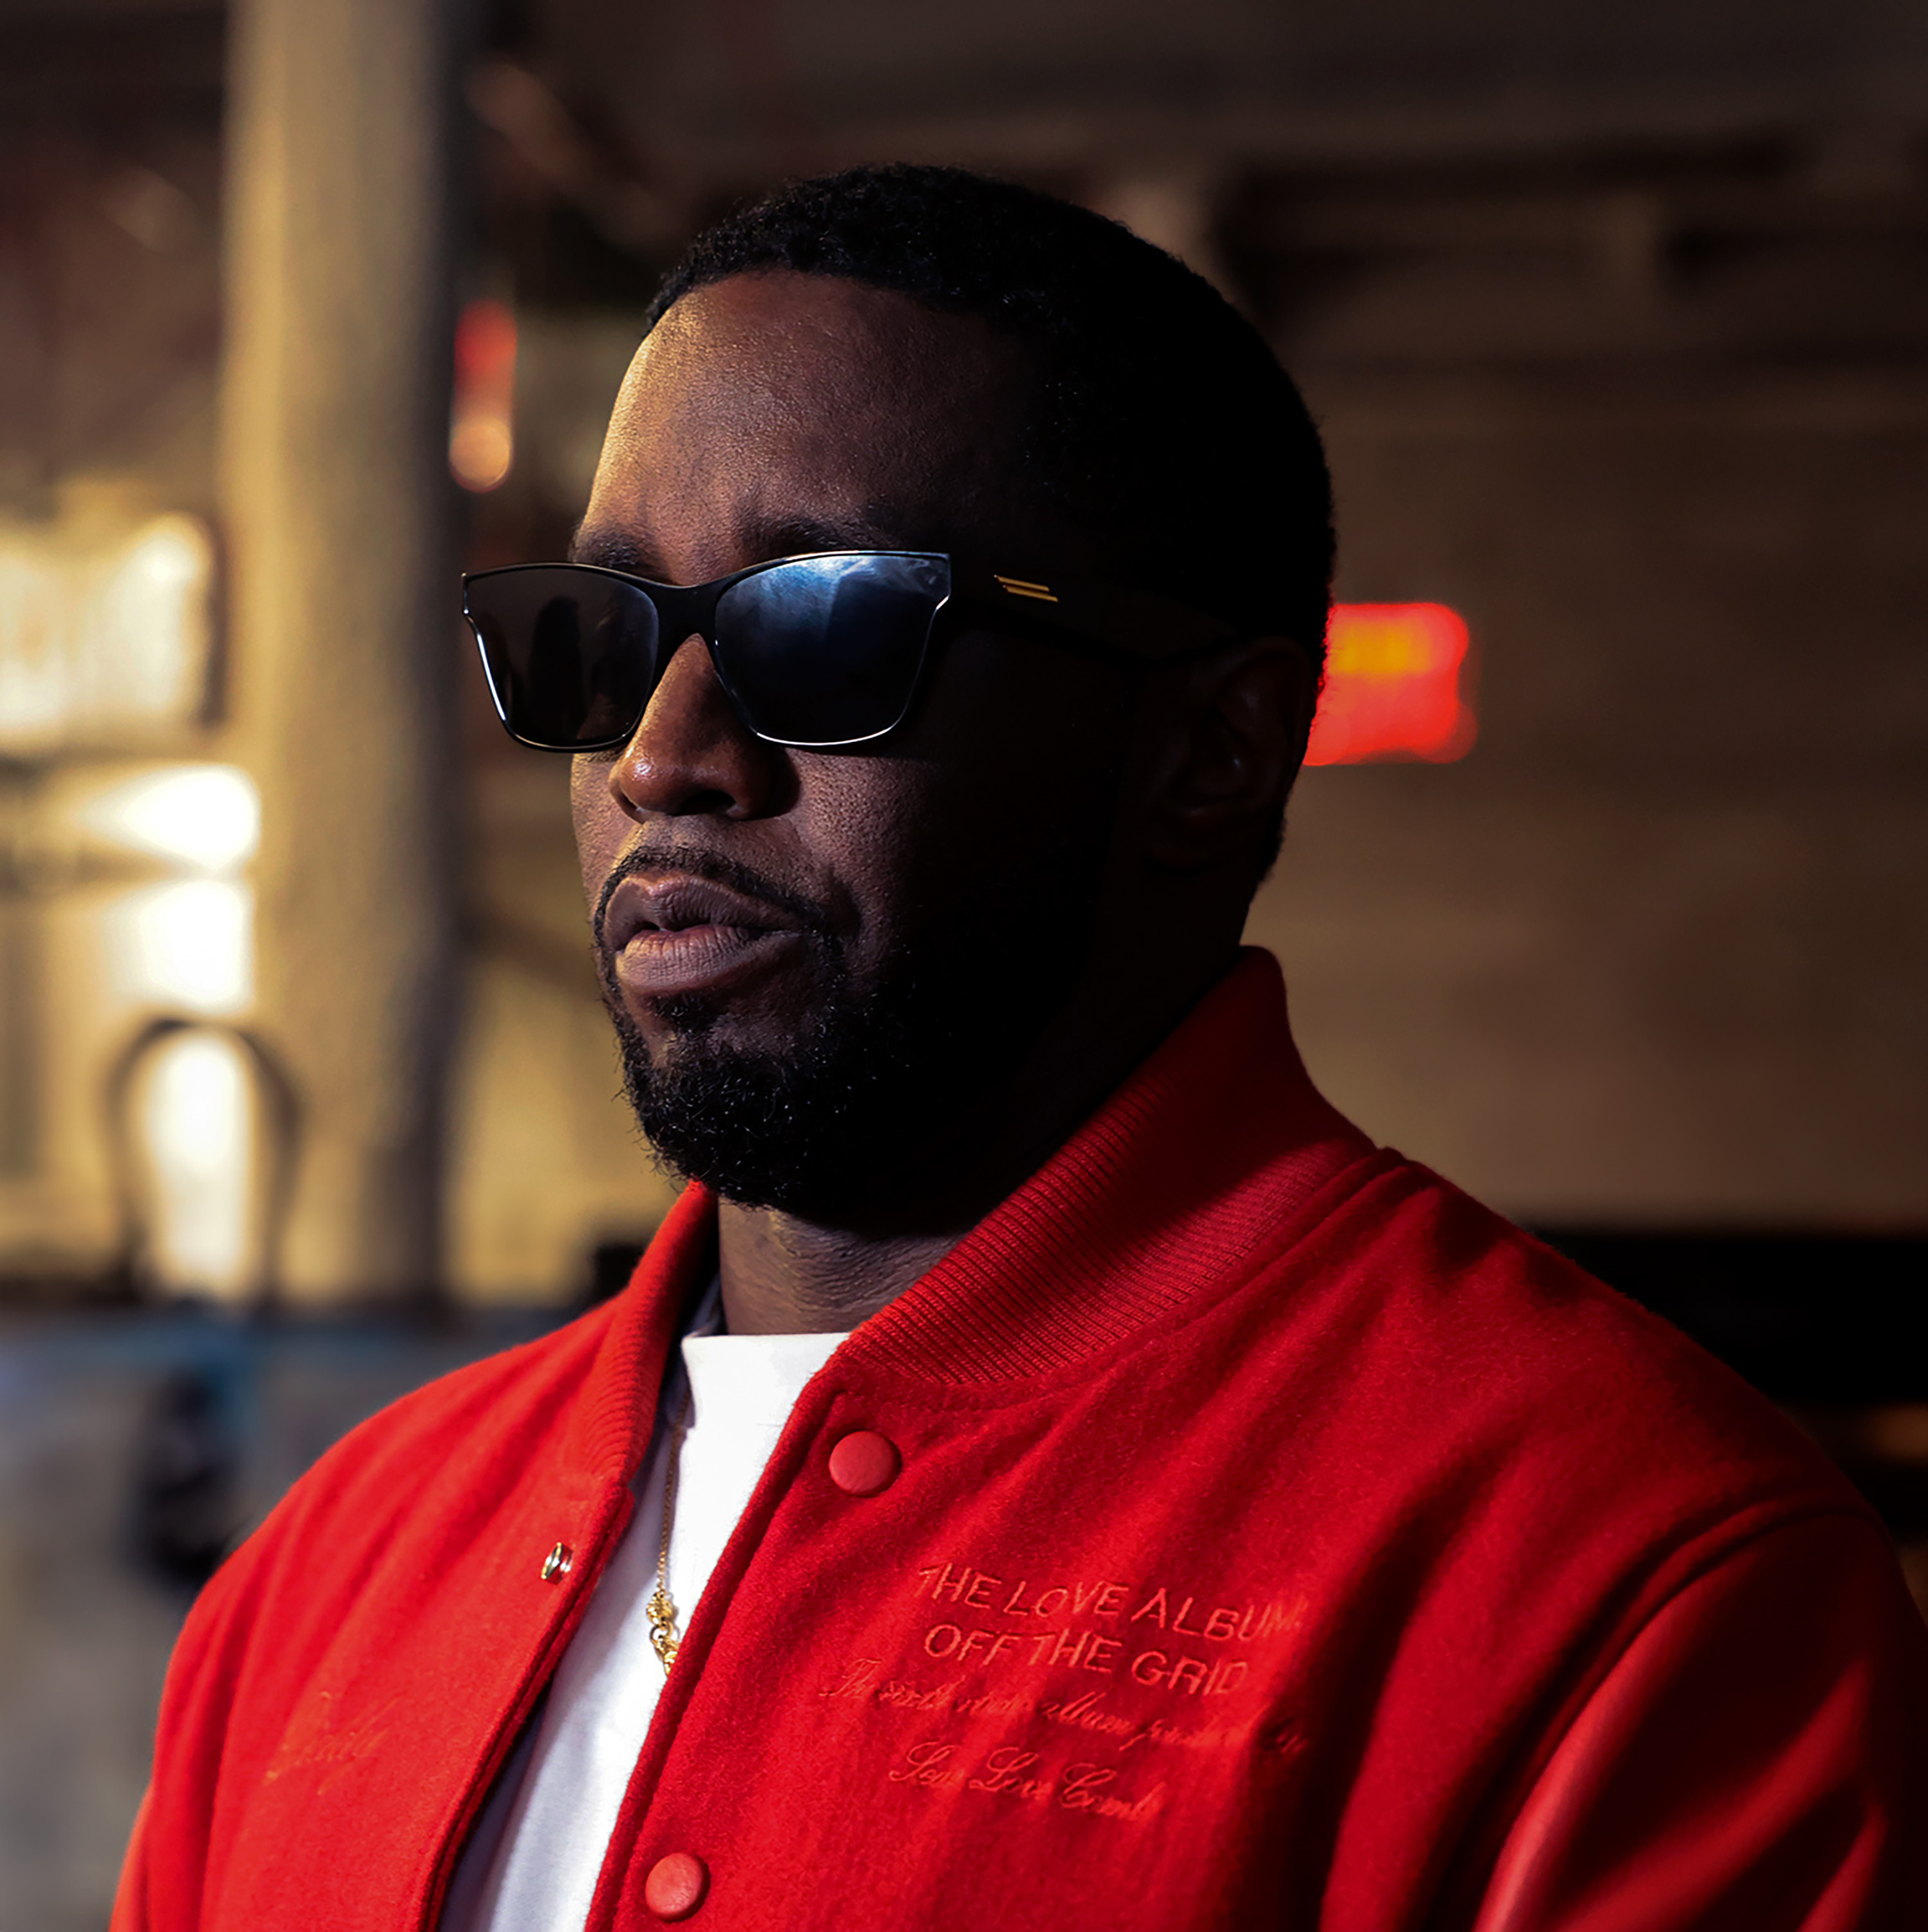 Sean &quot;Diddy&quot; Combs wearing sunglasses and a red jacket in a dimly lit setting